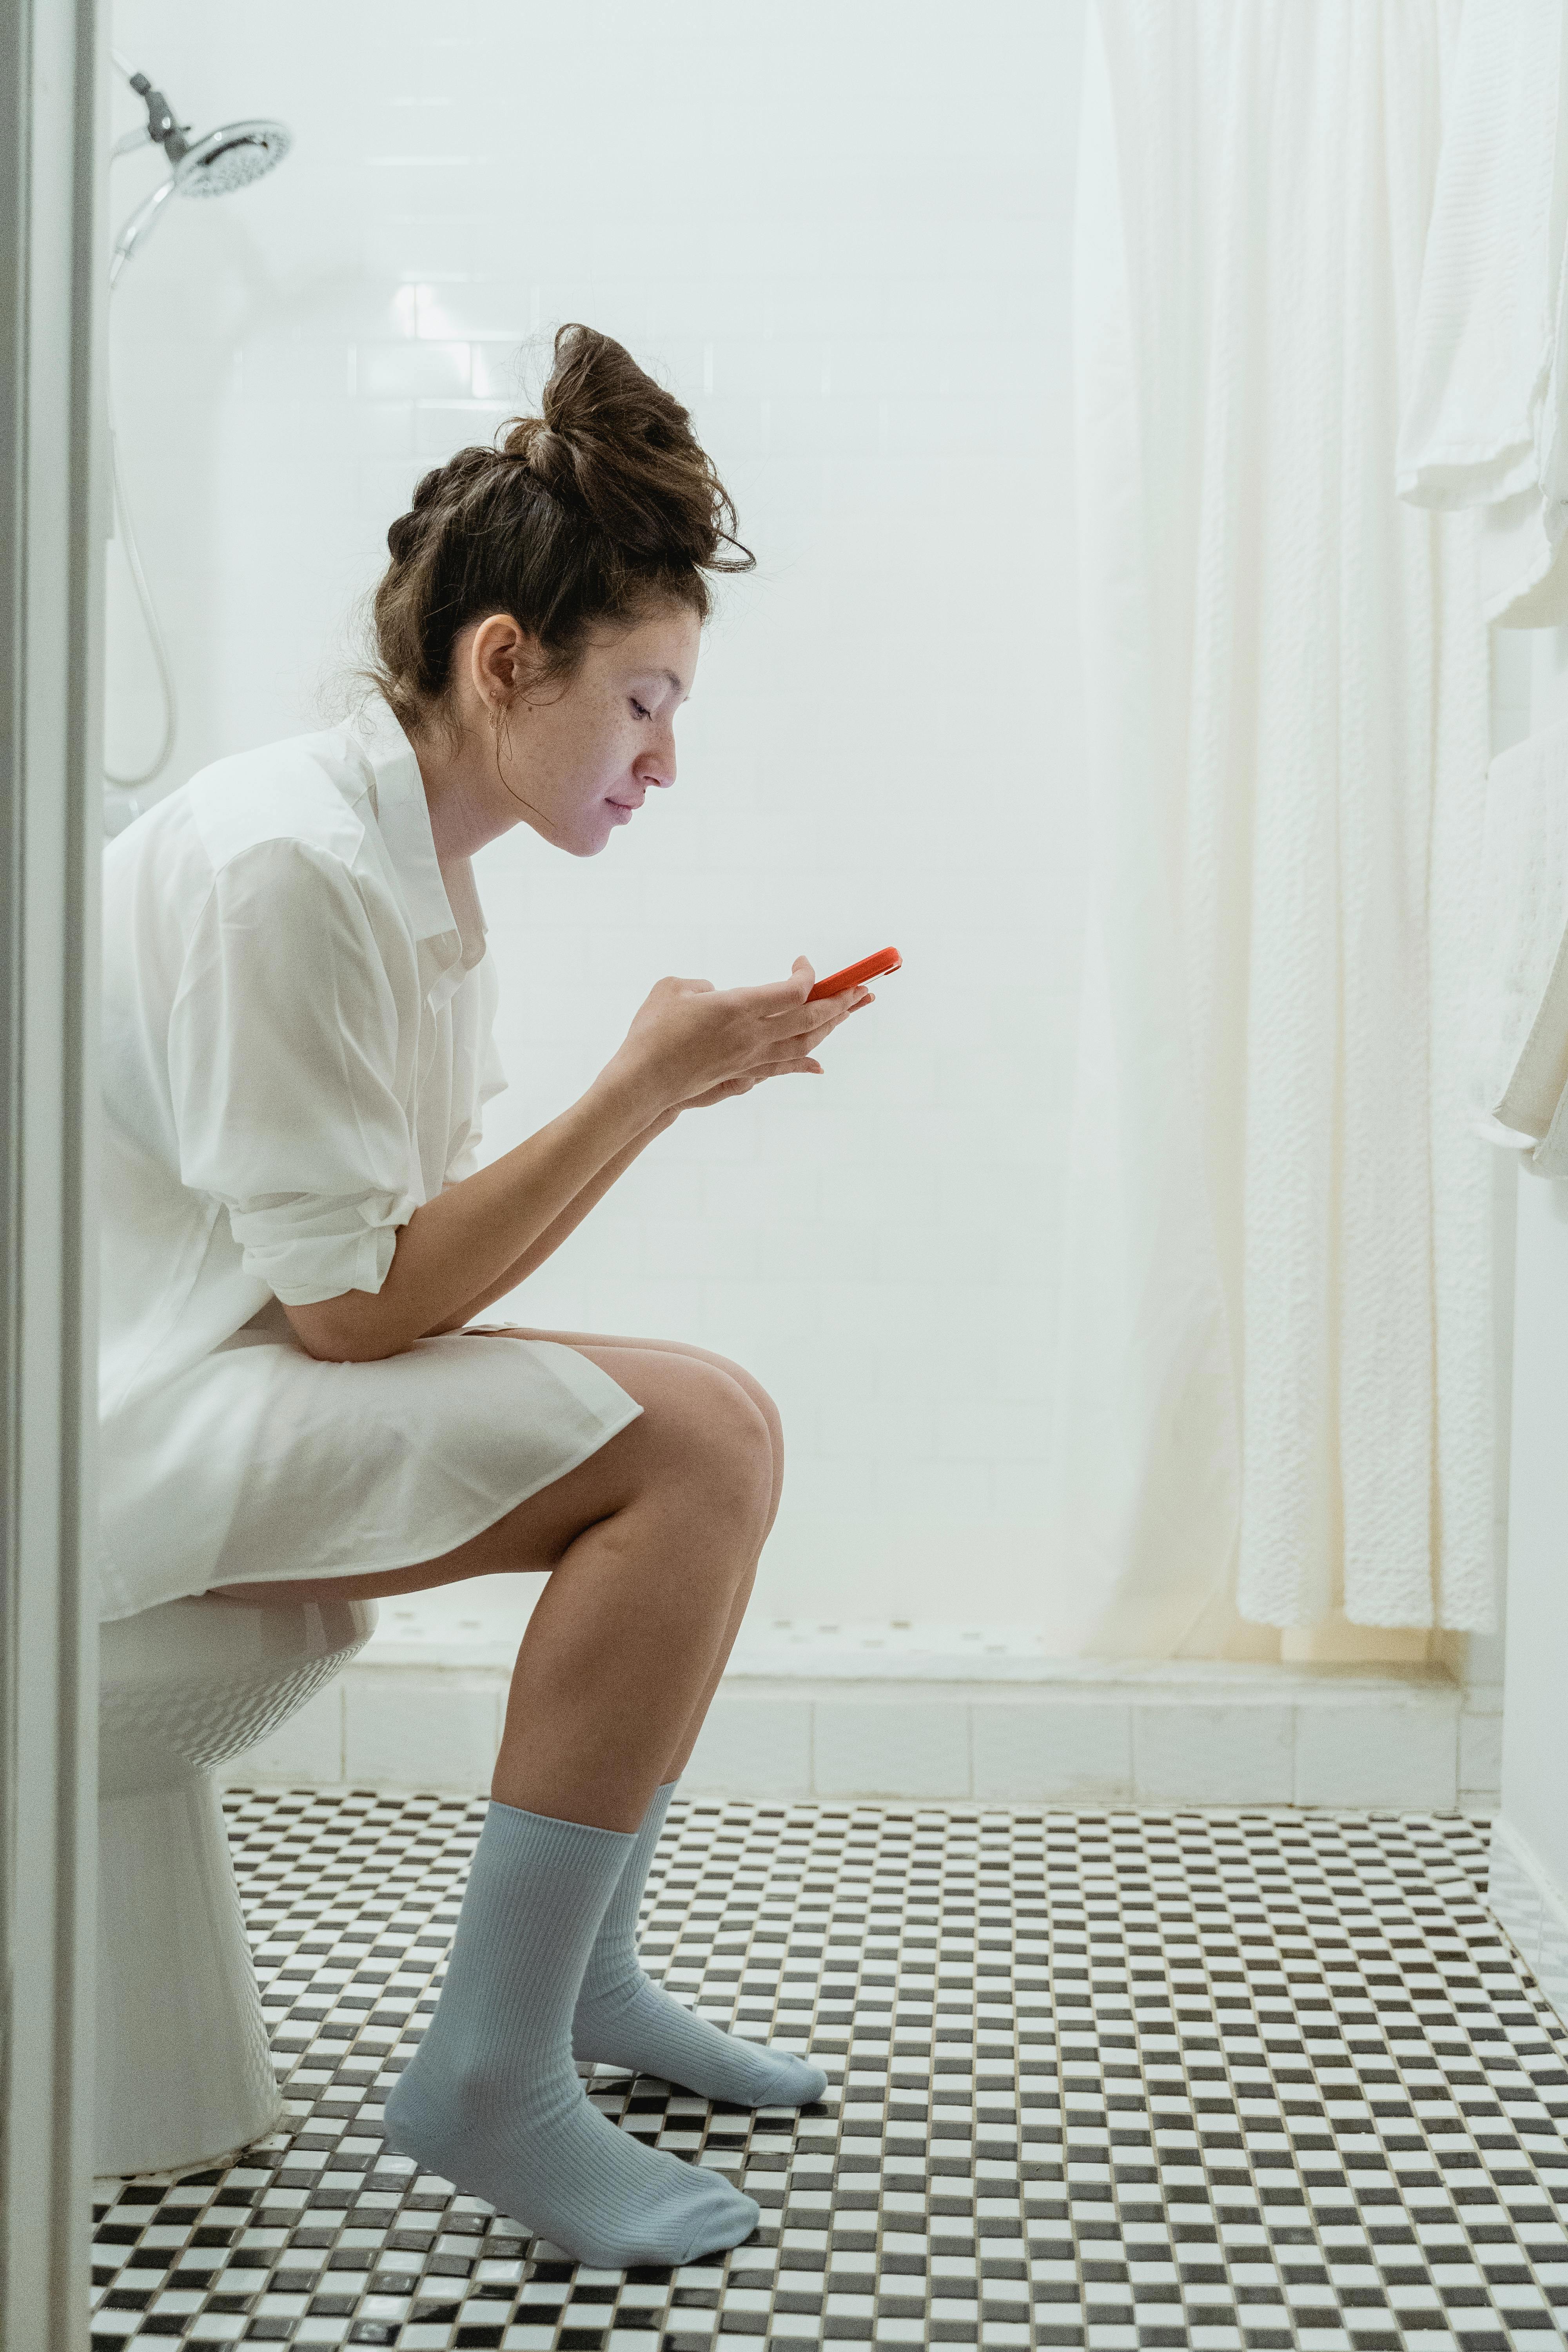 Stock photo of a woman on the toilet.